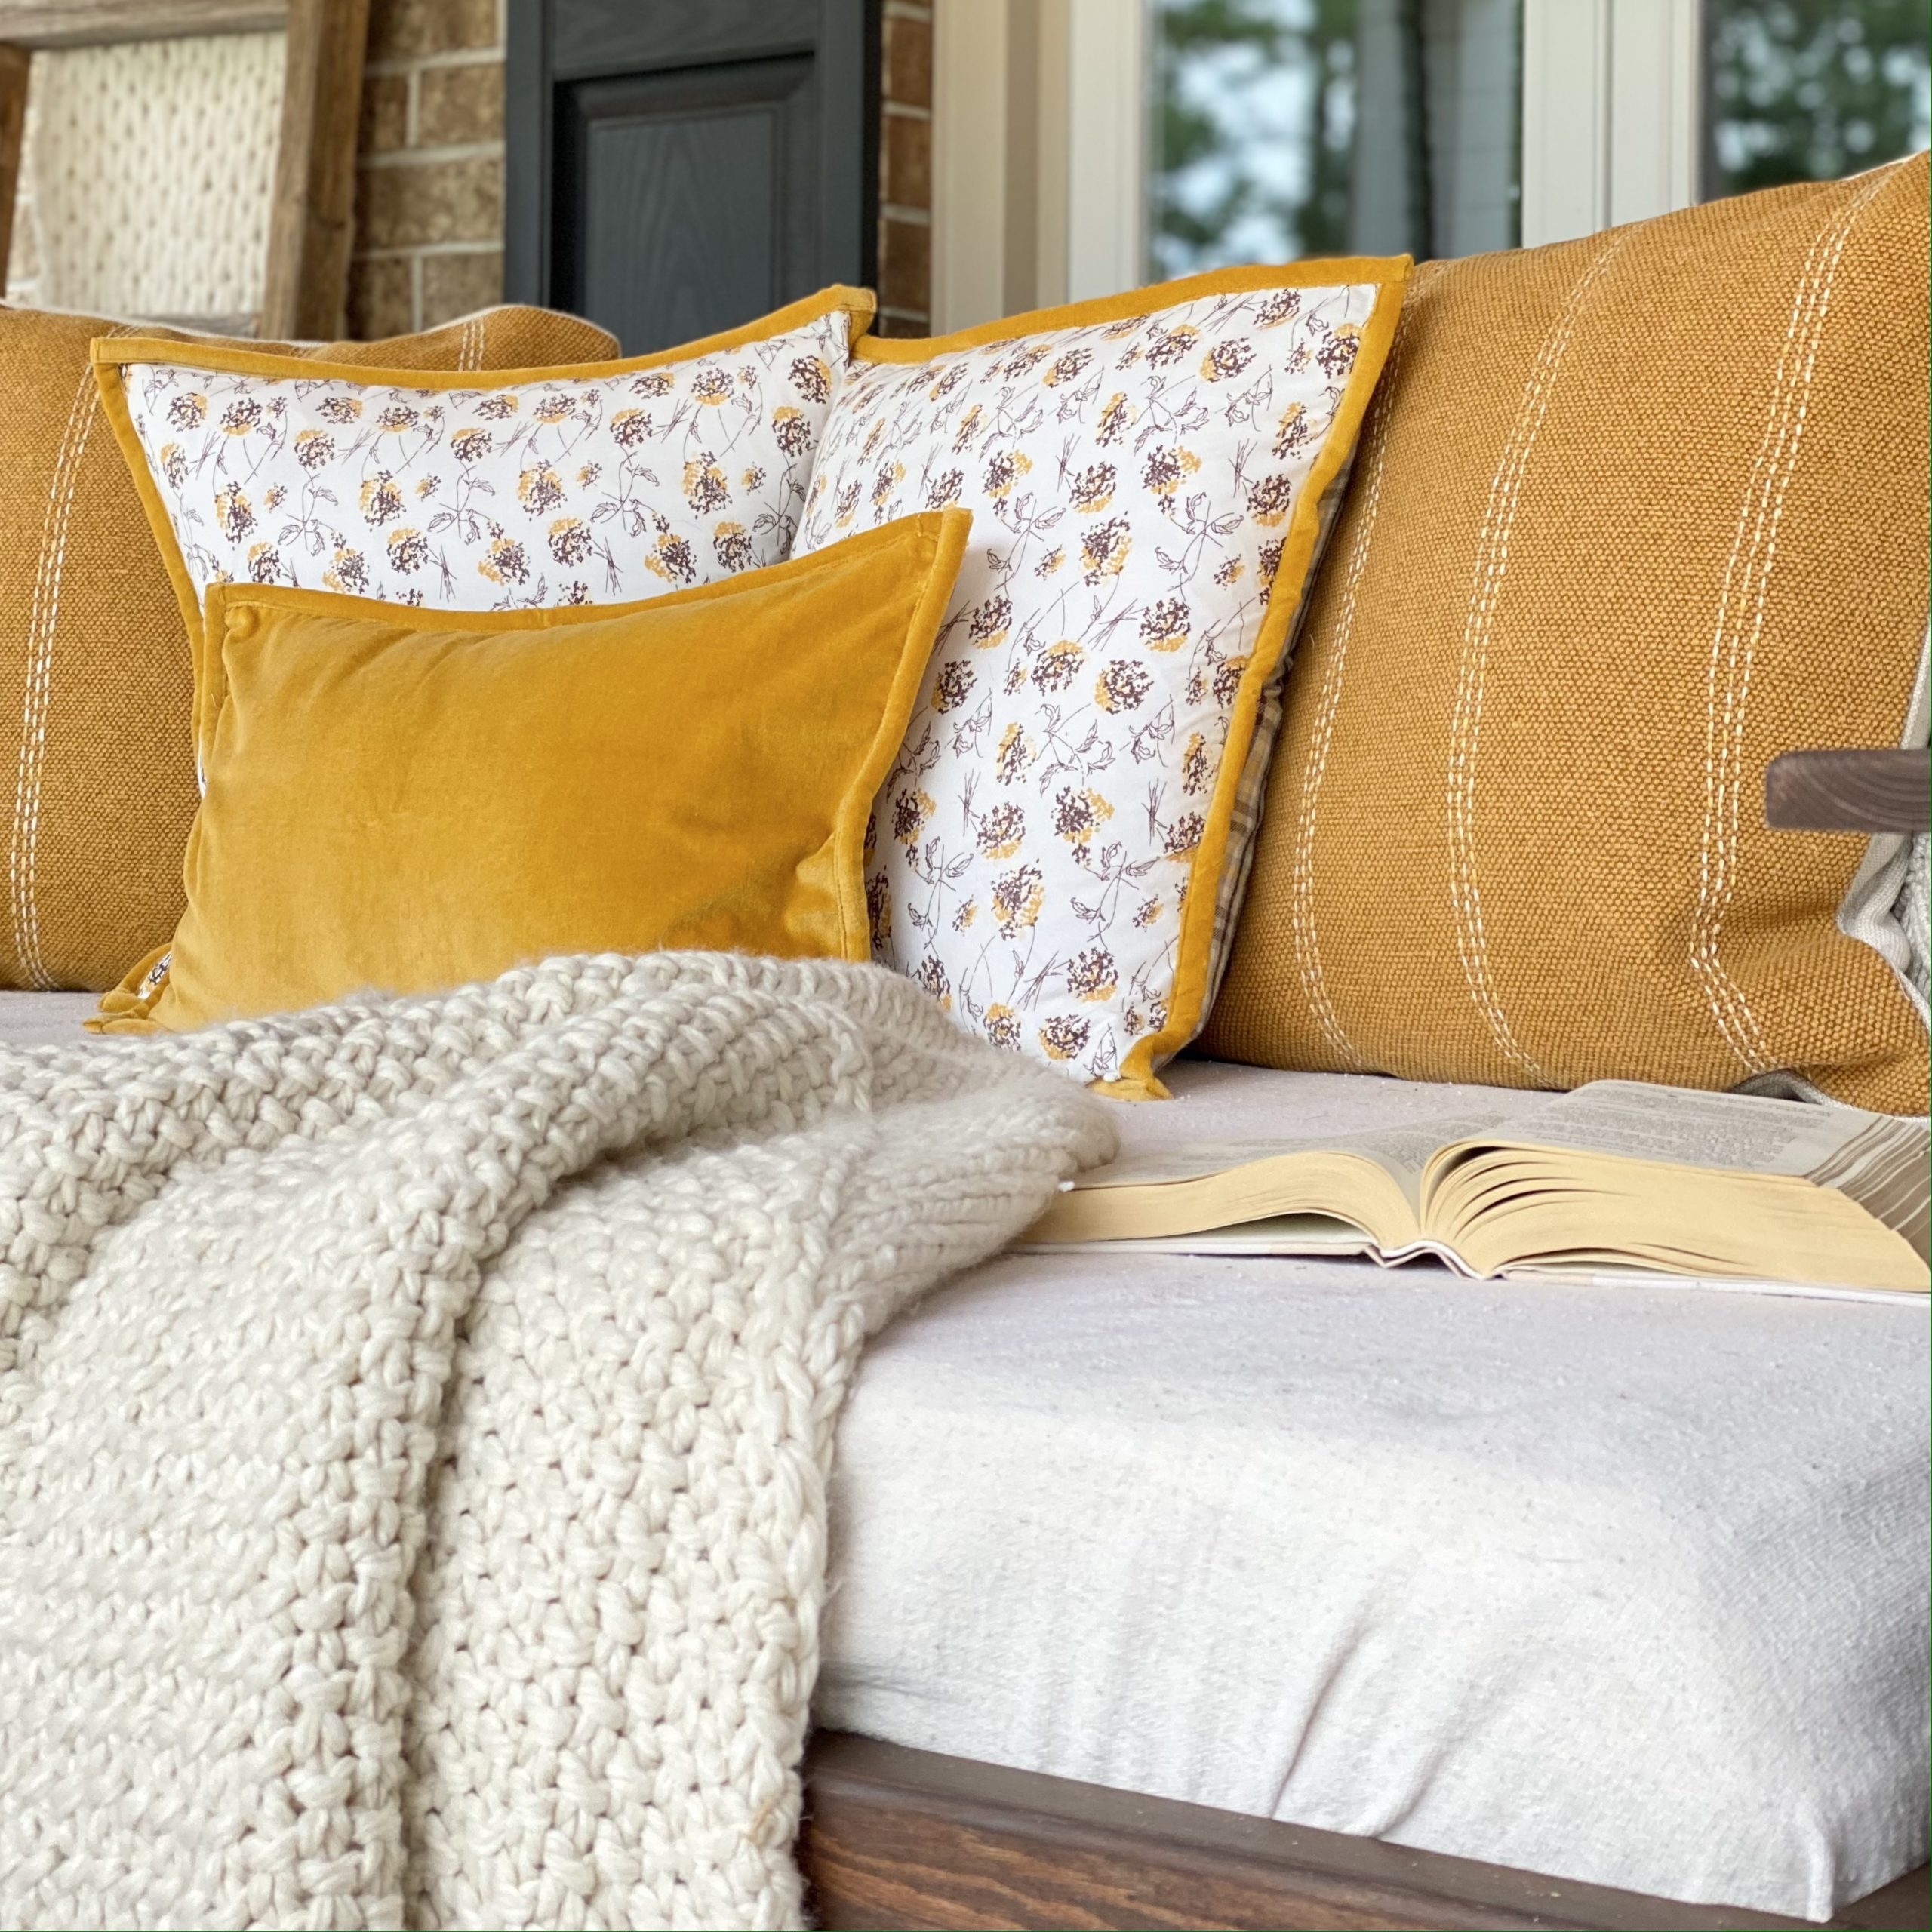 A collection of pillows on the porch swing in hues of mustard yellow, white, and cream with an off-white knit blanket and an open book.